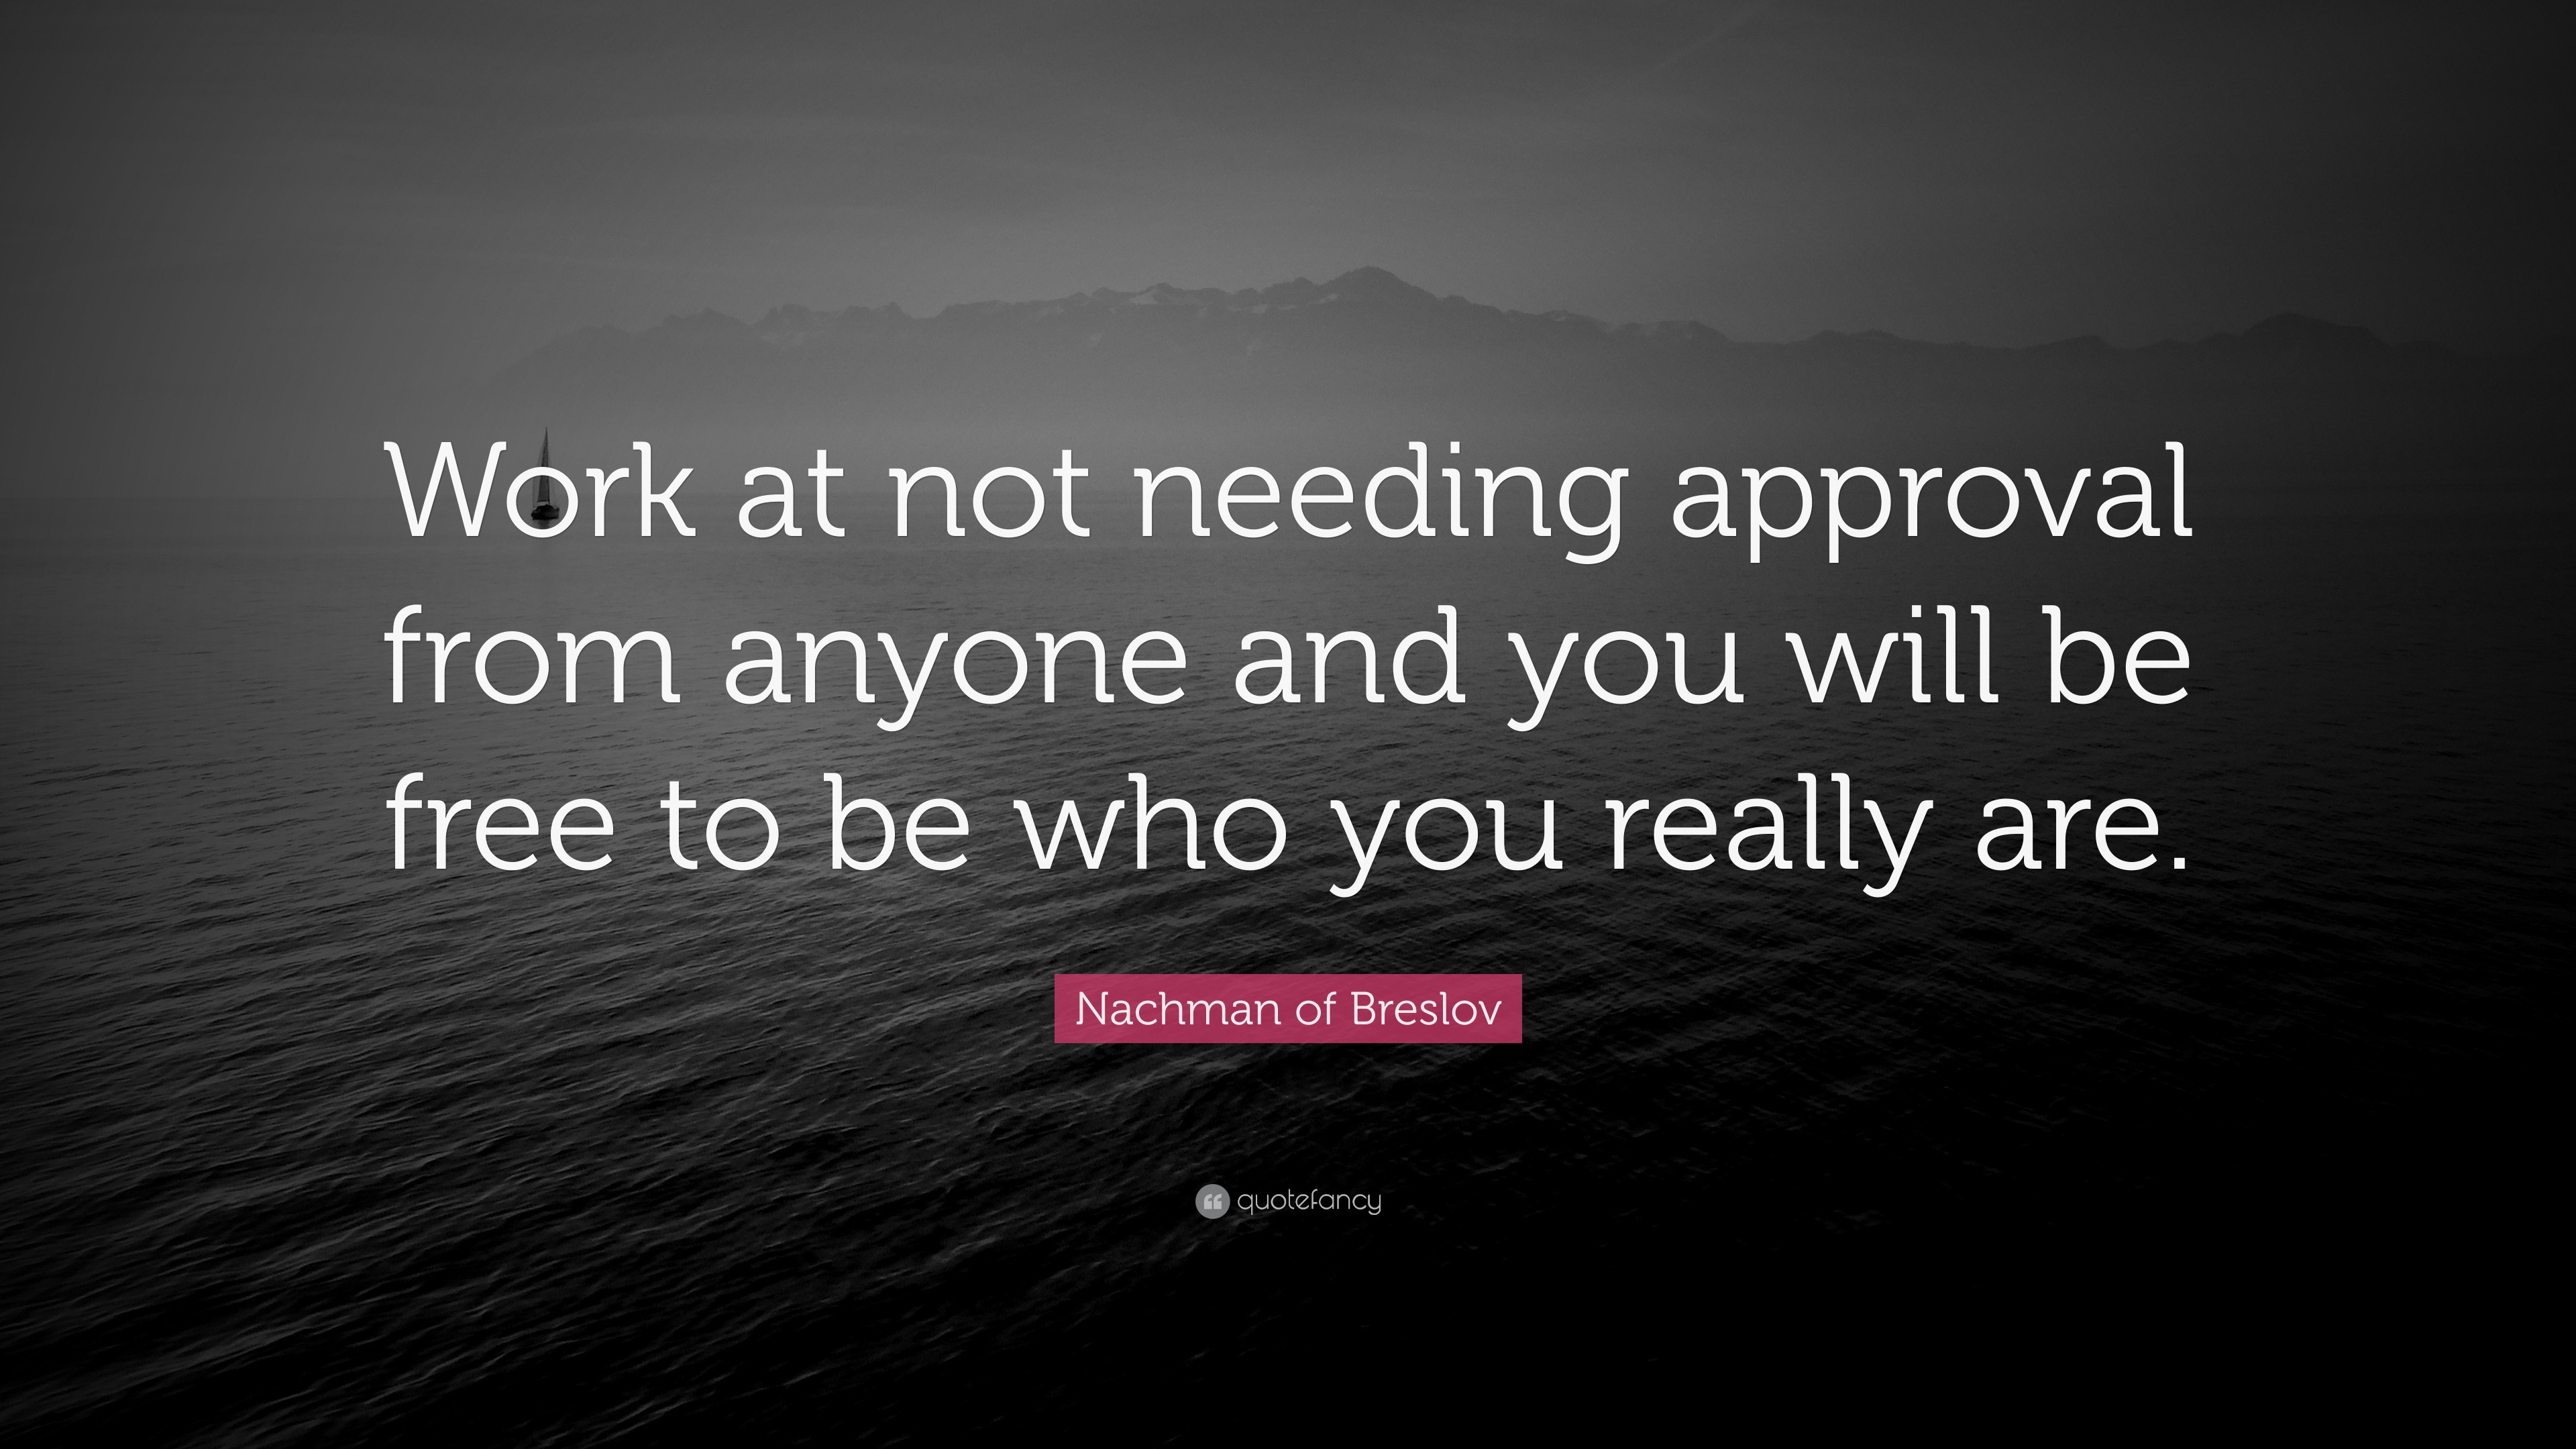 Nachman of Breslov Quote: “Work at not needing approval from anyone and